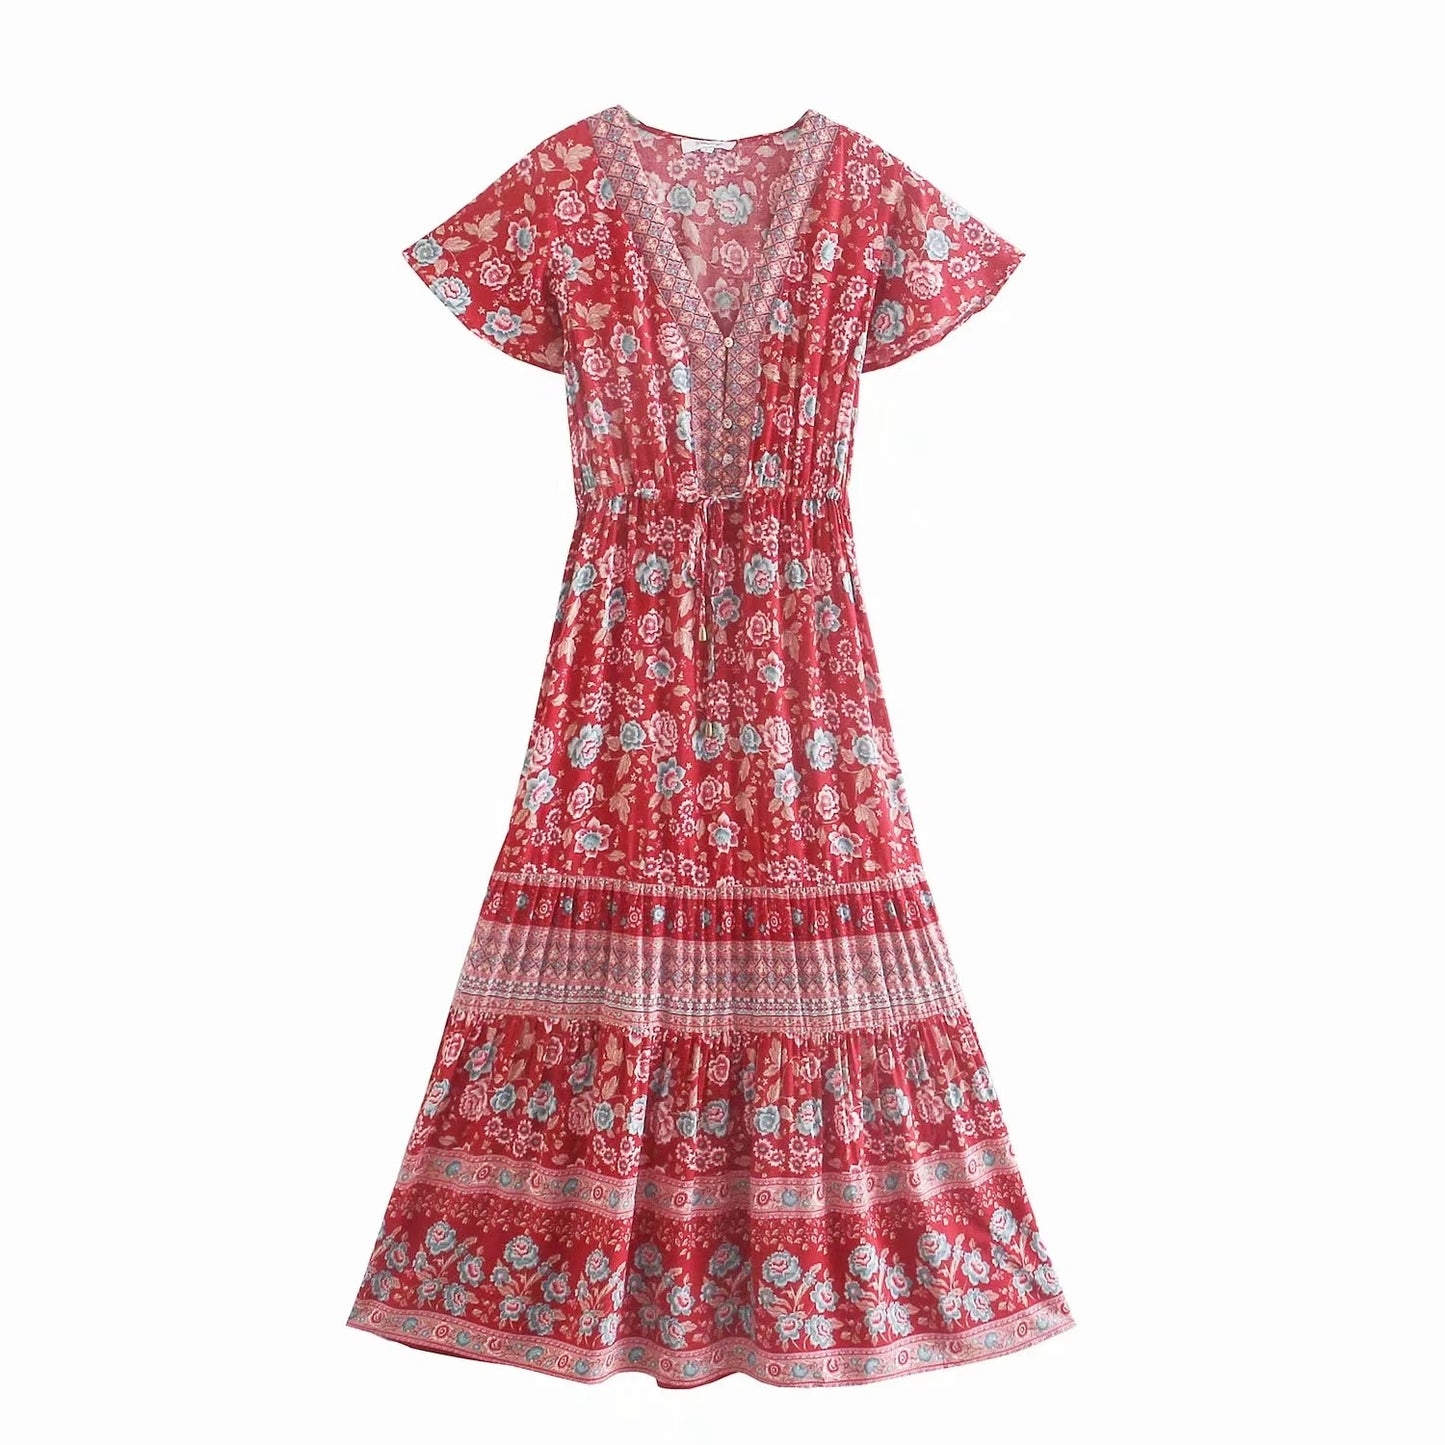 GypsyLady Floral Printed Maxi Dress Vintage Boho Summer Holiday Women Dresses Casual Chic Tie Lace Up Ladies Beach Female Dress